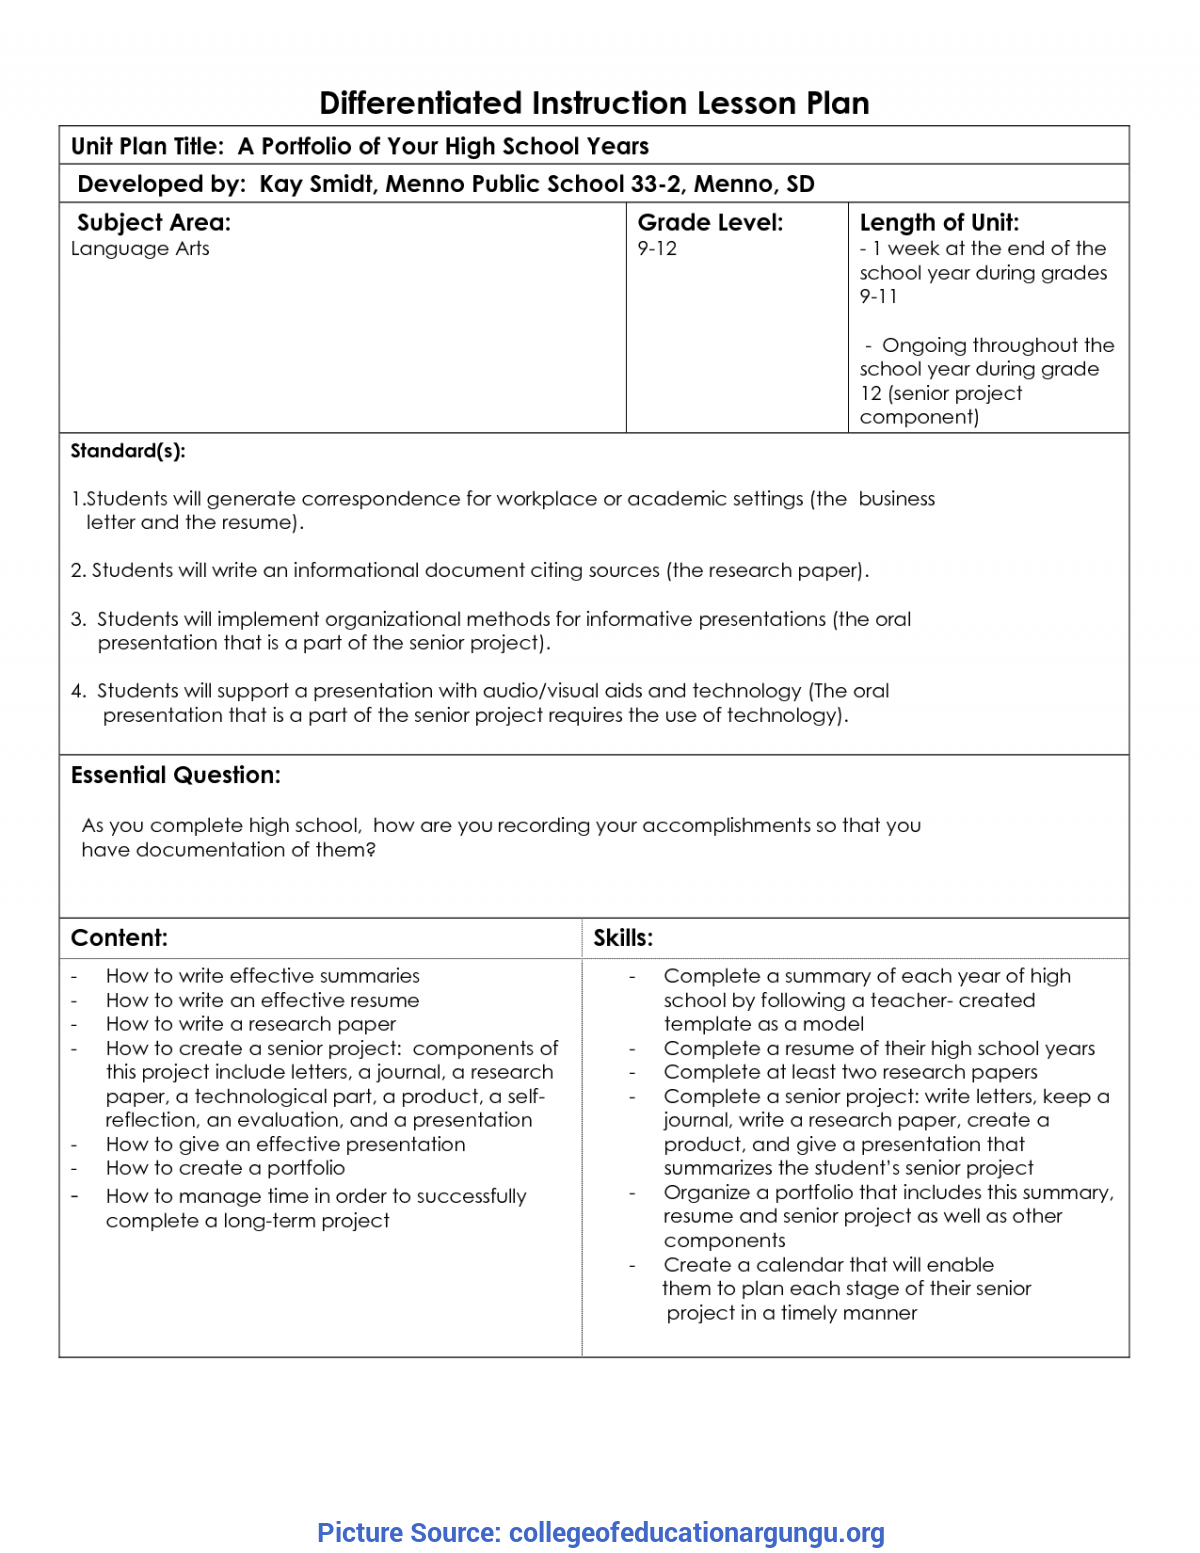 tiered instruction template